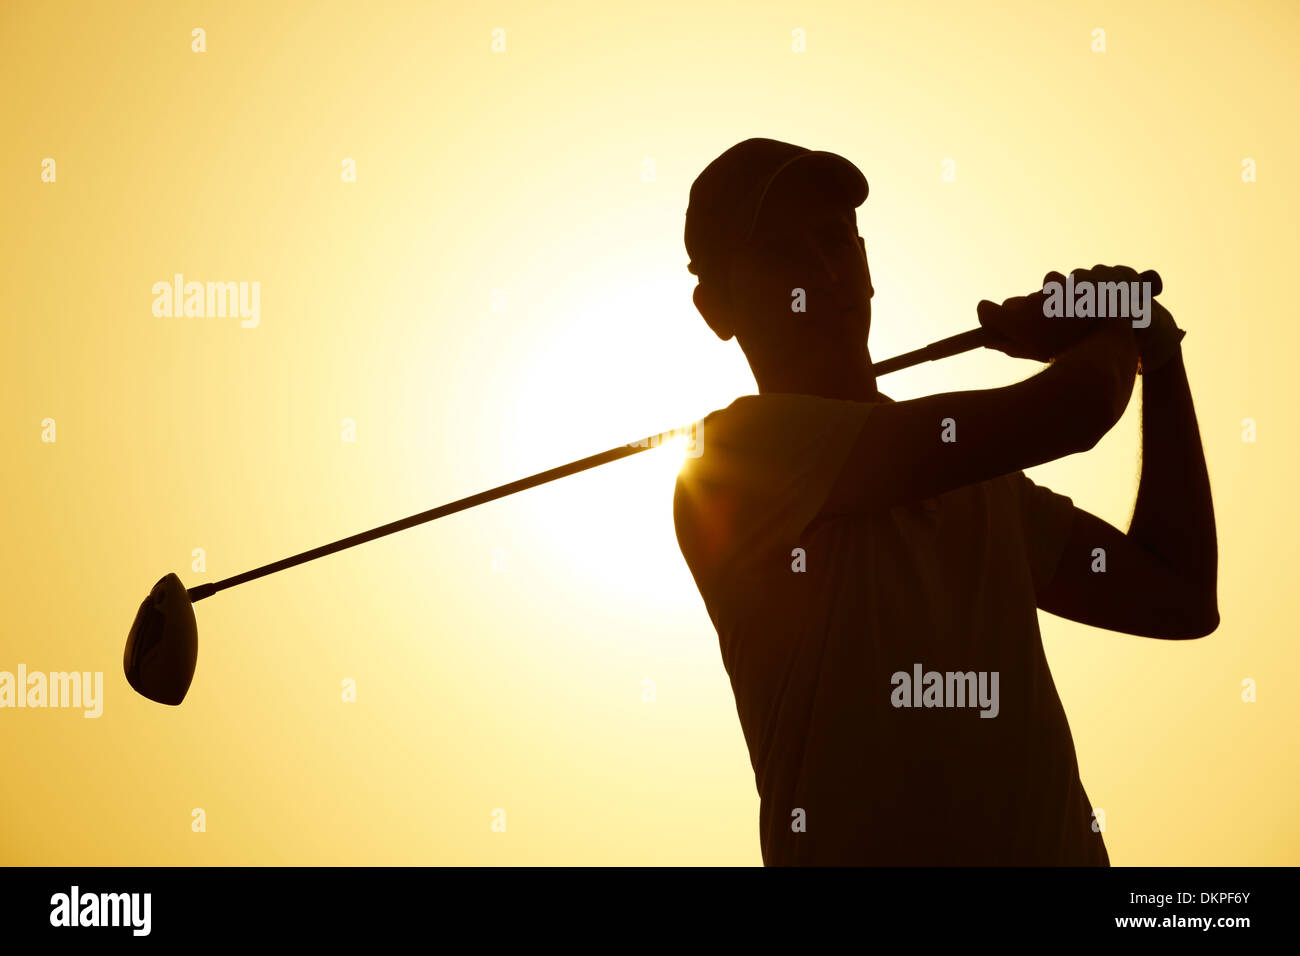 Silhouette of man playing golf outdoors Banque D'Images